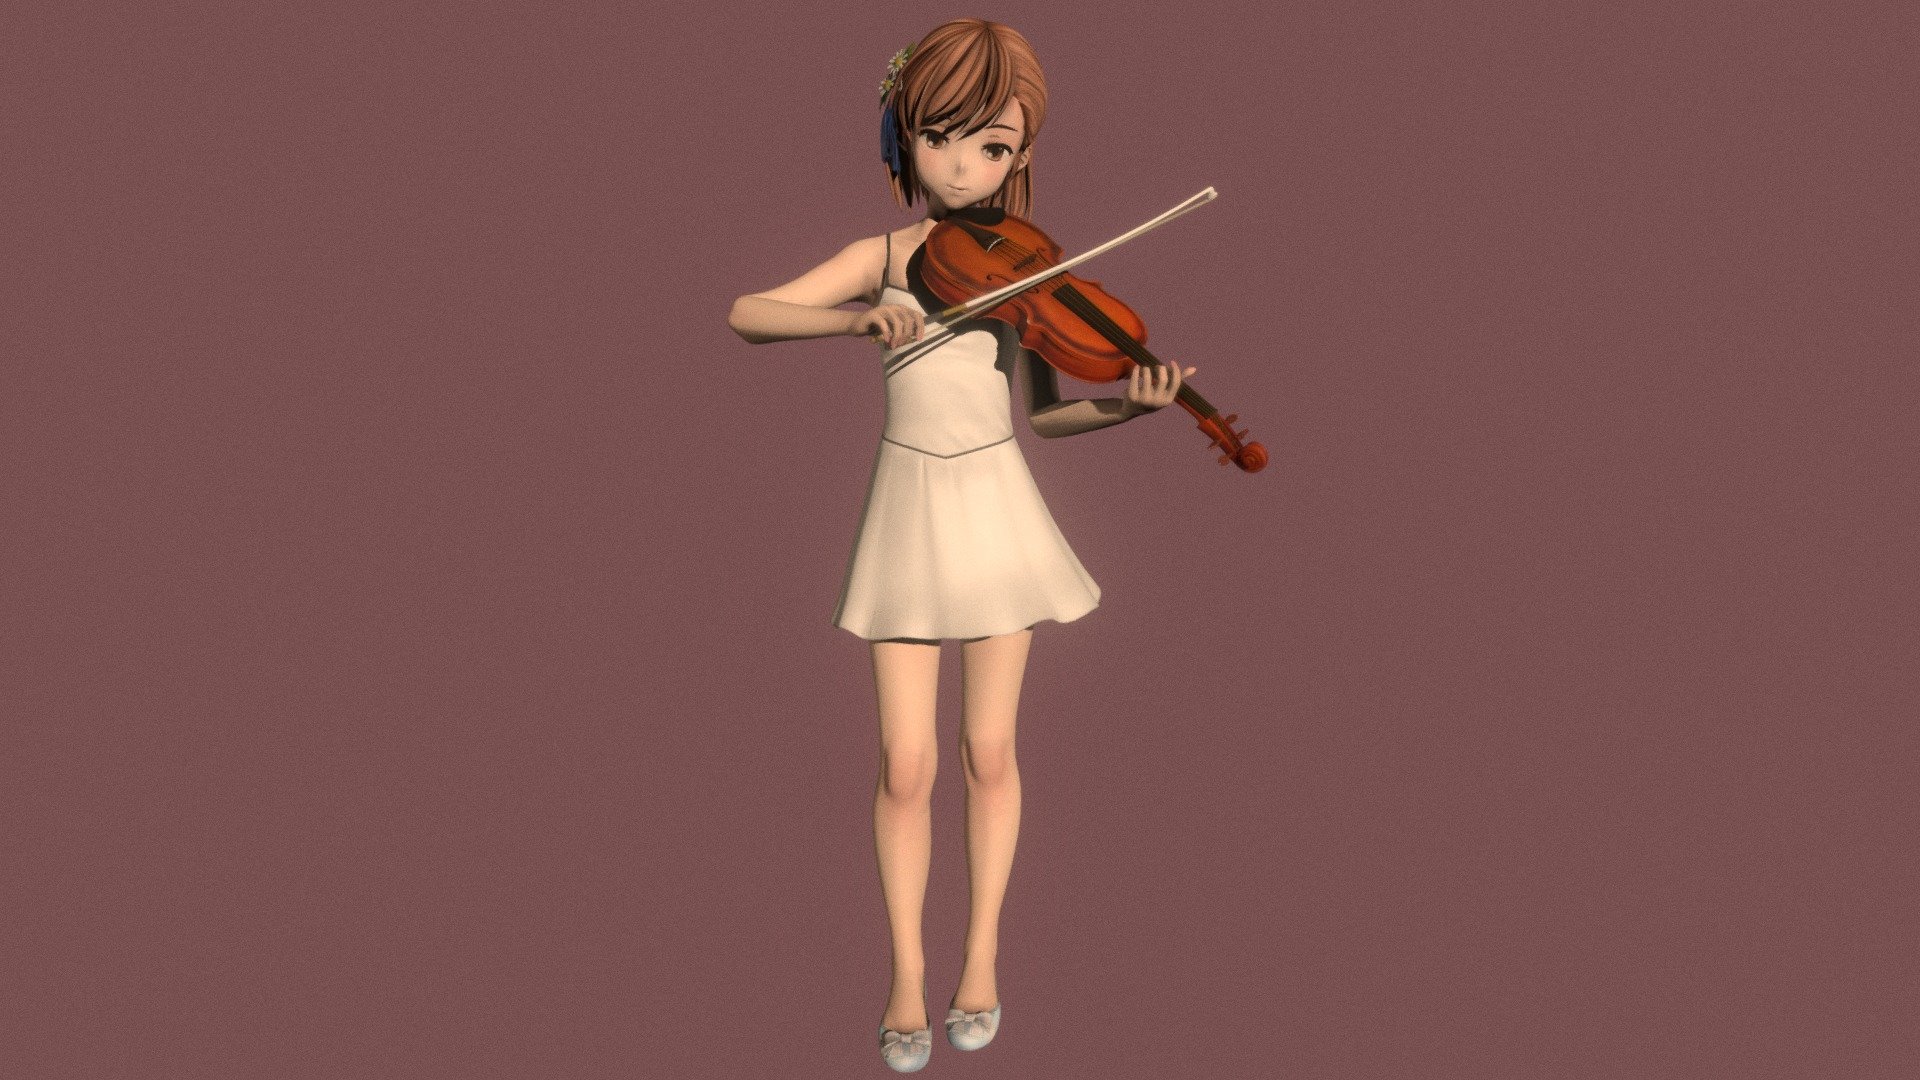 Posed model of anime girl Misaka Mikoto (A Certain Scientific Railgun).

This product include .FBX (ver. 7200) and .MAX (ver. 2010) files.

Rigged version: https://sketchfab.com/3d-models/t-pose-rigged-model-of-misaka-mikoto-d10be8b9d9b24baea1356ea1f993a35b

I support convert this 3D model to various file formats: 3DS; AI; ASE; DAE; DWF; DWG; DXF; FLT; HTR; IGS; M3G; MQO; OBJ; SAT; STL; W3D; WRL; X.

You can buy all of my models in one pack to save cost: https://sketchfab.com/3d-models/all-of-my-anime-girls-c5a56156994e4193b9e8fa21a3b8360b

And I can make commission models.

If you have any questions, please leave a comment or contact me via my email 3d.eden.project@gmail.com 3d model